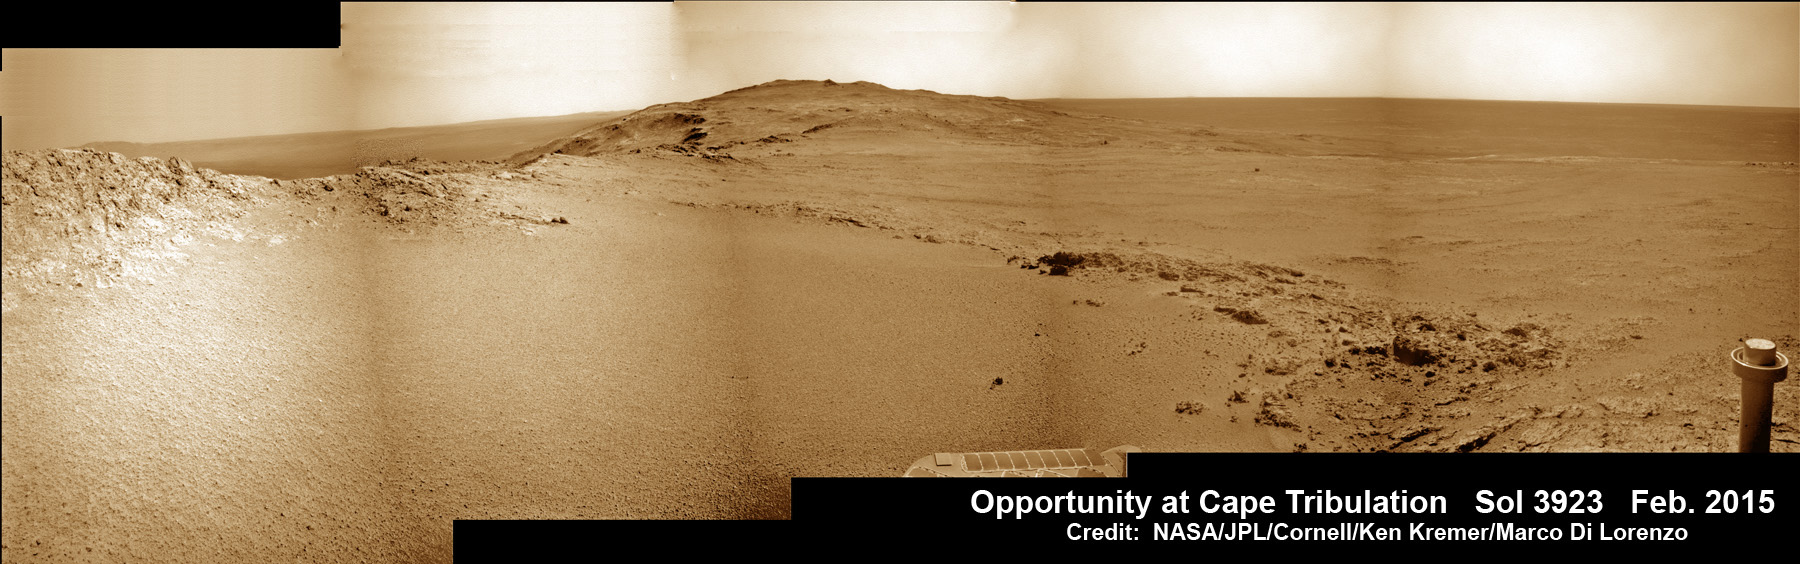 NASA’s Resilient Opportunity Rover Heading to Martian Science Treasure on Feb. 5, 2015.  The rover operates just fine after 11 Years on Mars, despite efforts by Earth-bound budget cutter to “Kill Opportunity!  This brand new view from atop Cape Tribulation was taken just after departing the summit and shows the down slope road ahead to next science destination at Marathon Valley just a few dozen meters away.  This navcam camera photo mosaic was assembled from images taken on Sol 3923 (Feb. 5, 2015) and colorized.  Credit: NASA/JPL/Cornell/Ken Kremer/kenkremer.com/Marco Di Lorenzo